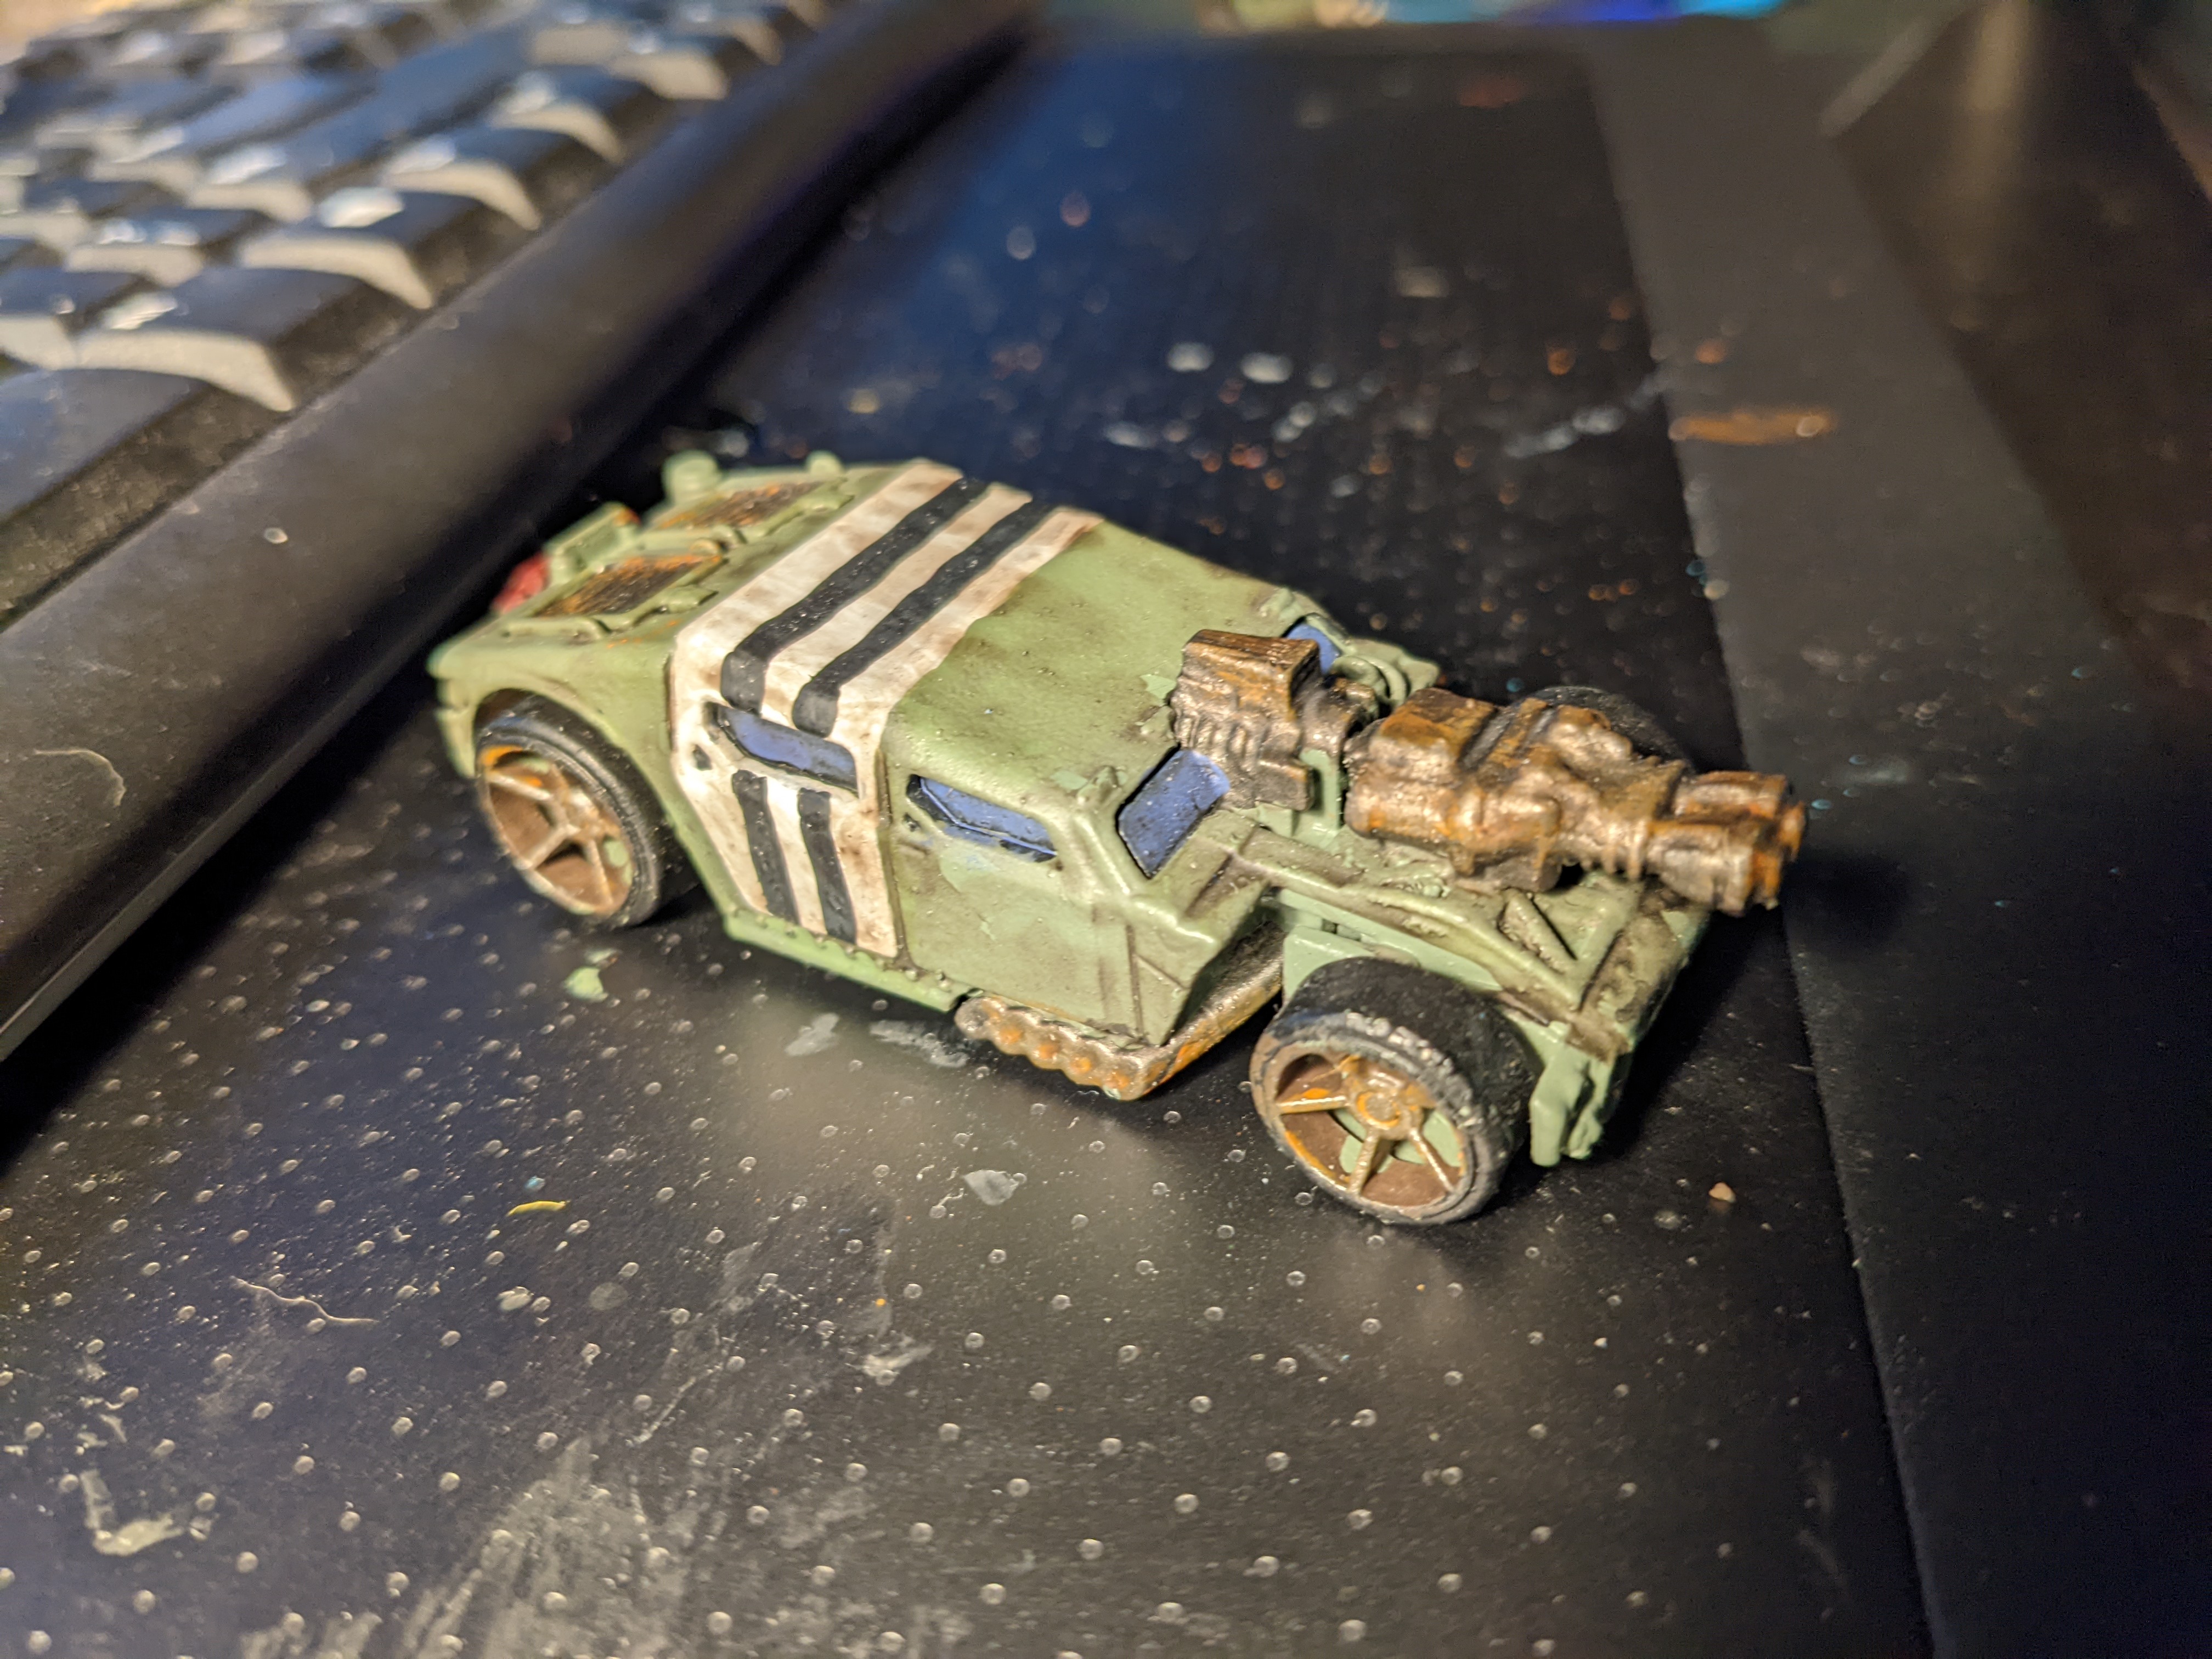 A drab green hotrod with a flamethrower on the hood.